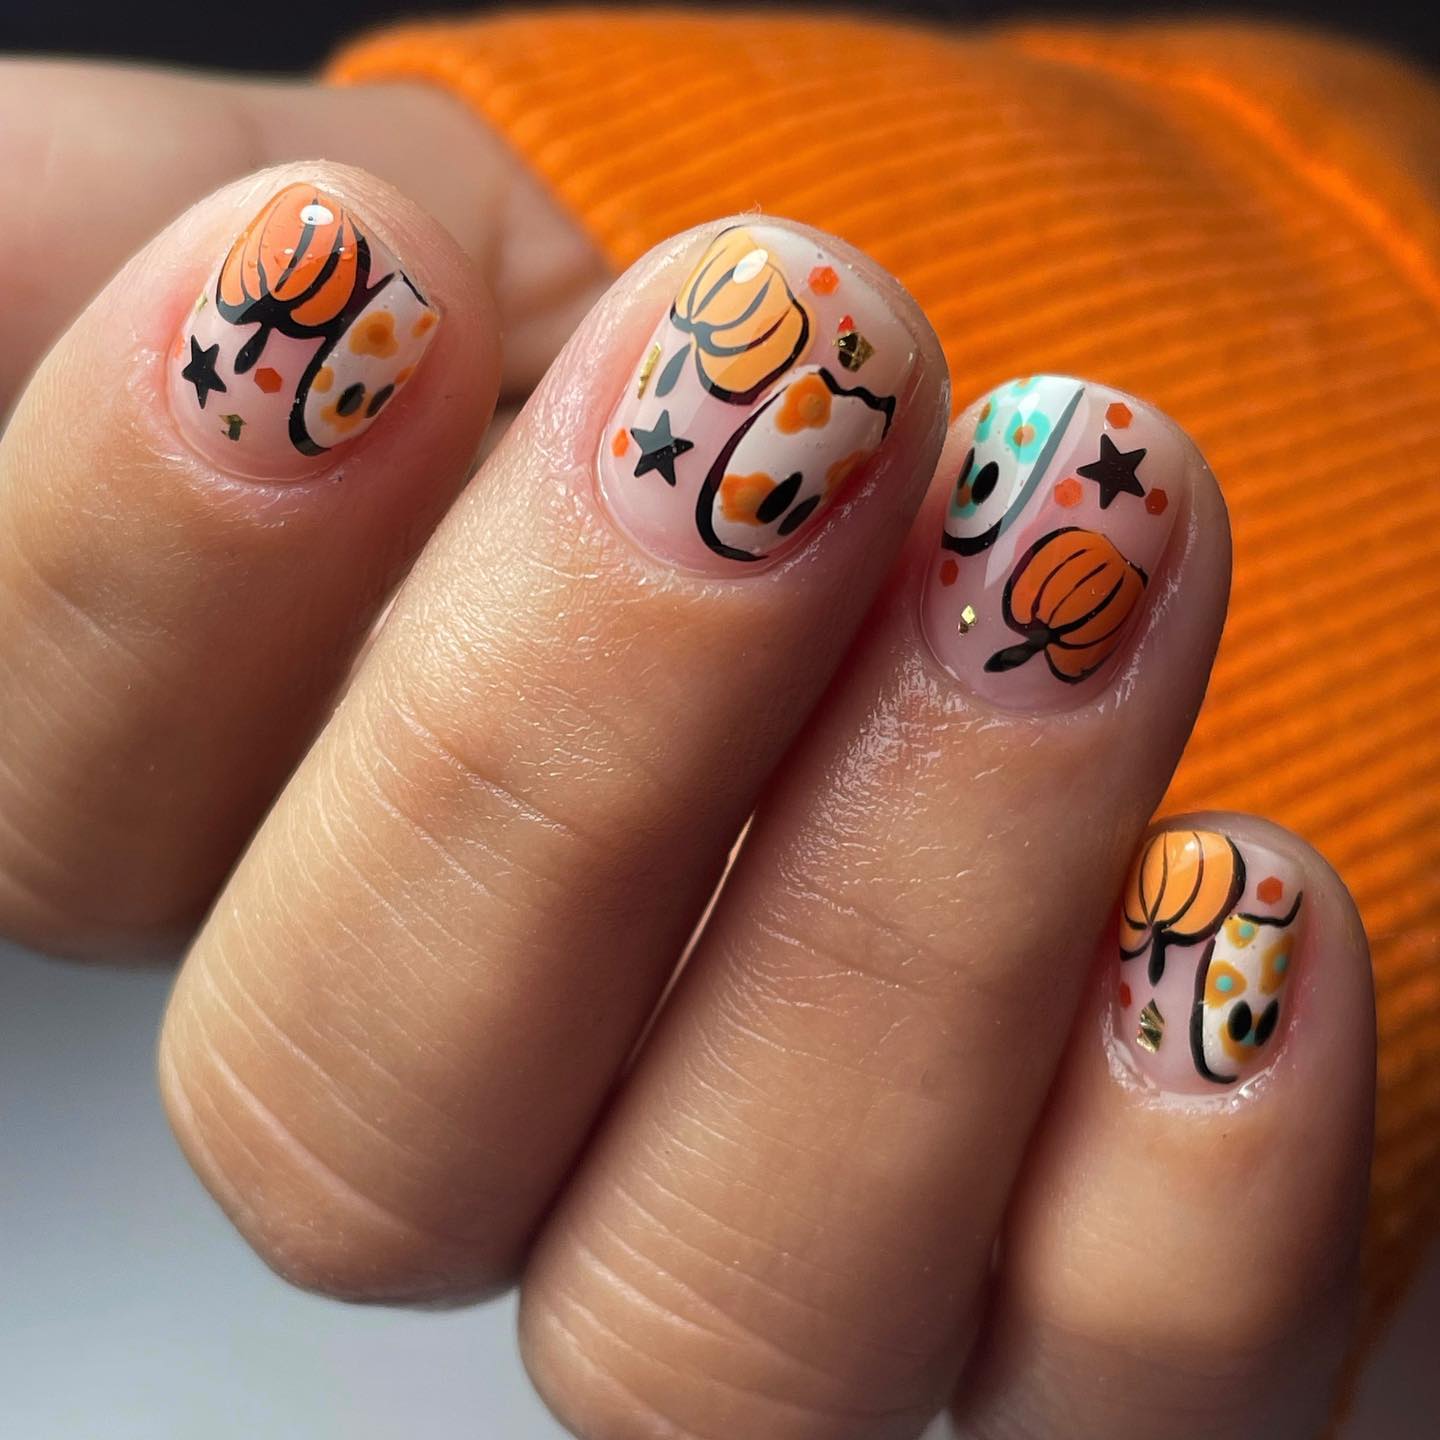 If you want to have fun with your nails, pumpkin nail art is amazing for you! Having pumpkin nails is an easy way to get into the Halloween spirit. To spice up your look, you should consider applying it.